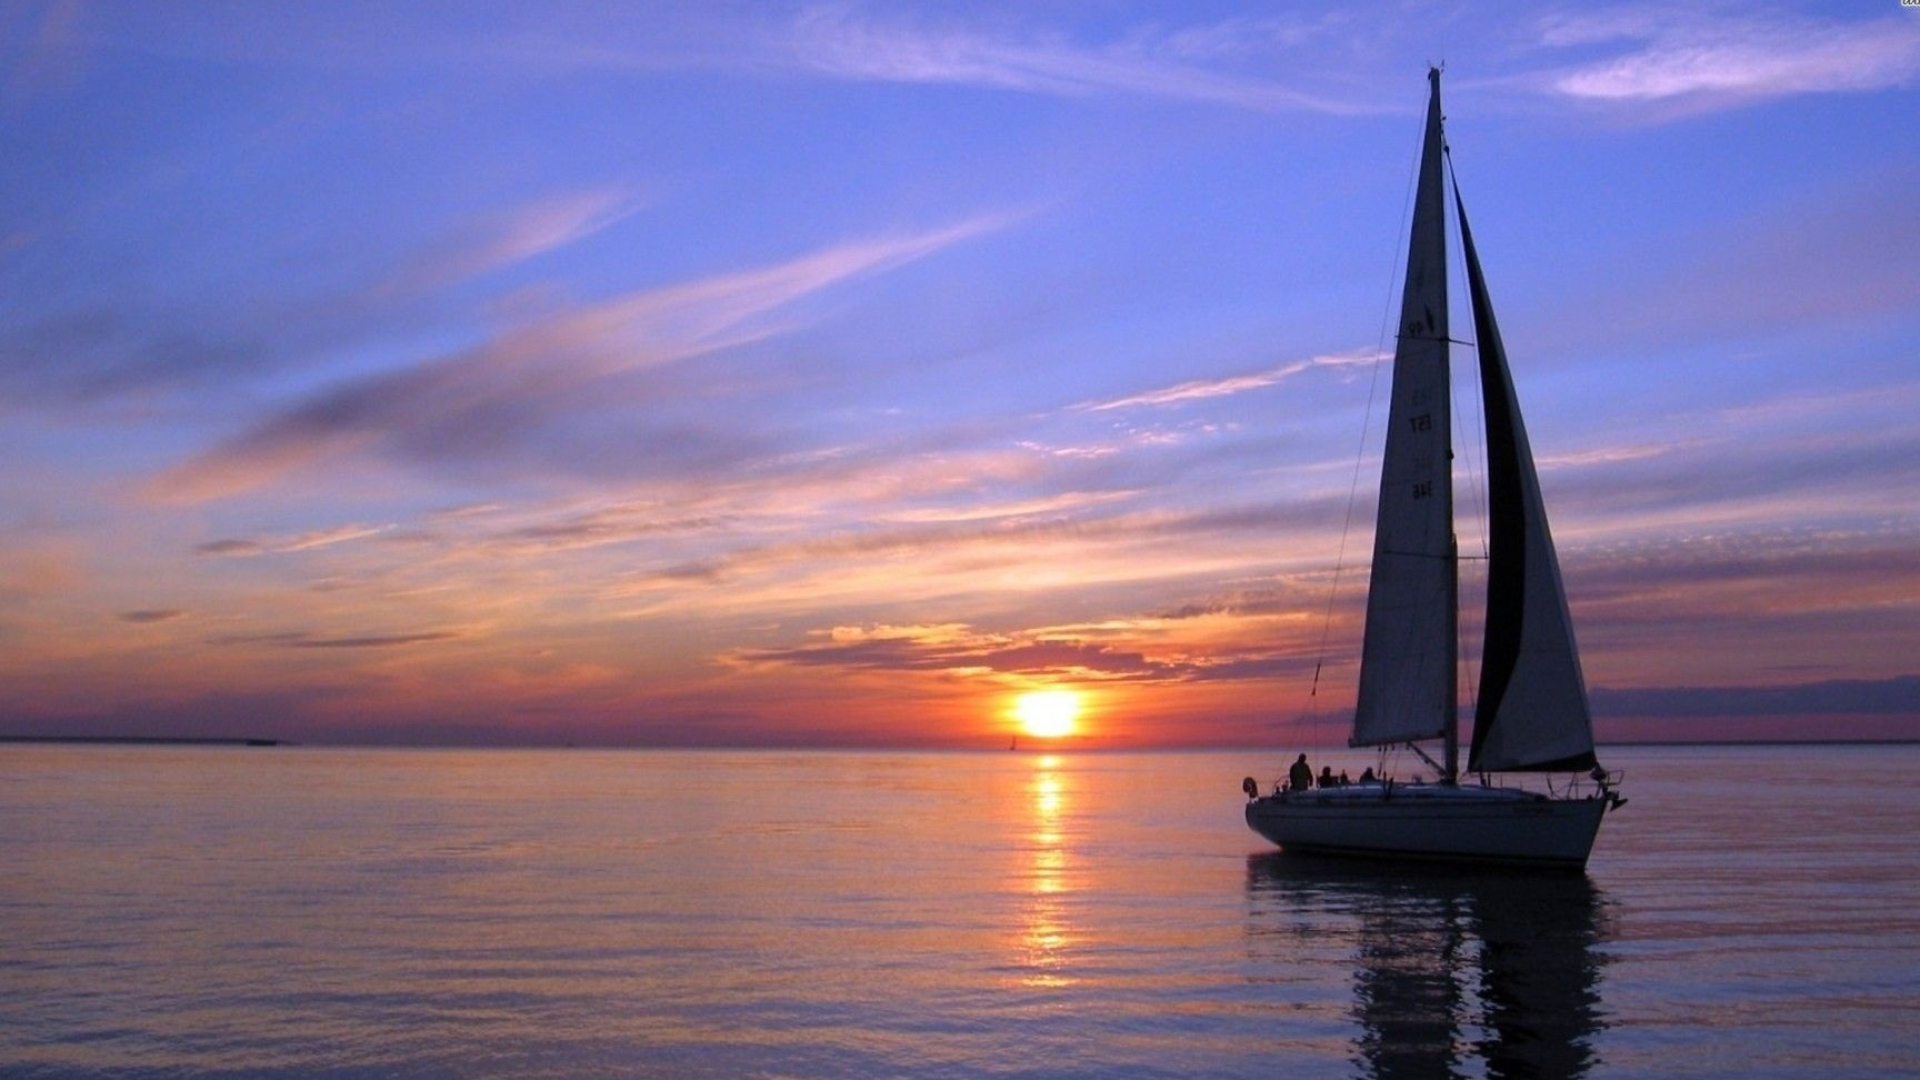 Sail Boat: A vessel used for recreational purposes, Sailing at sunset. 1920x1080 Full HD Wallpaper.